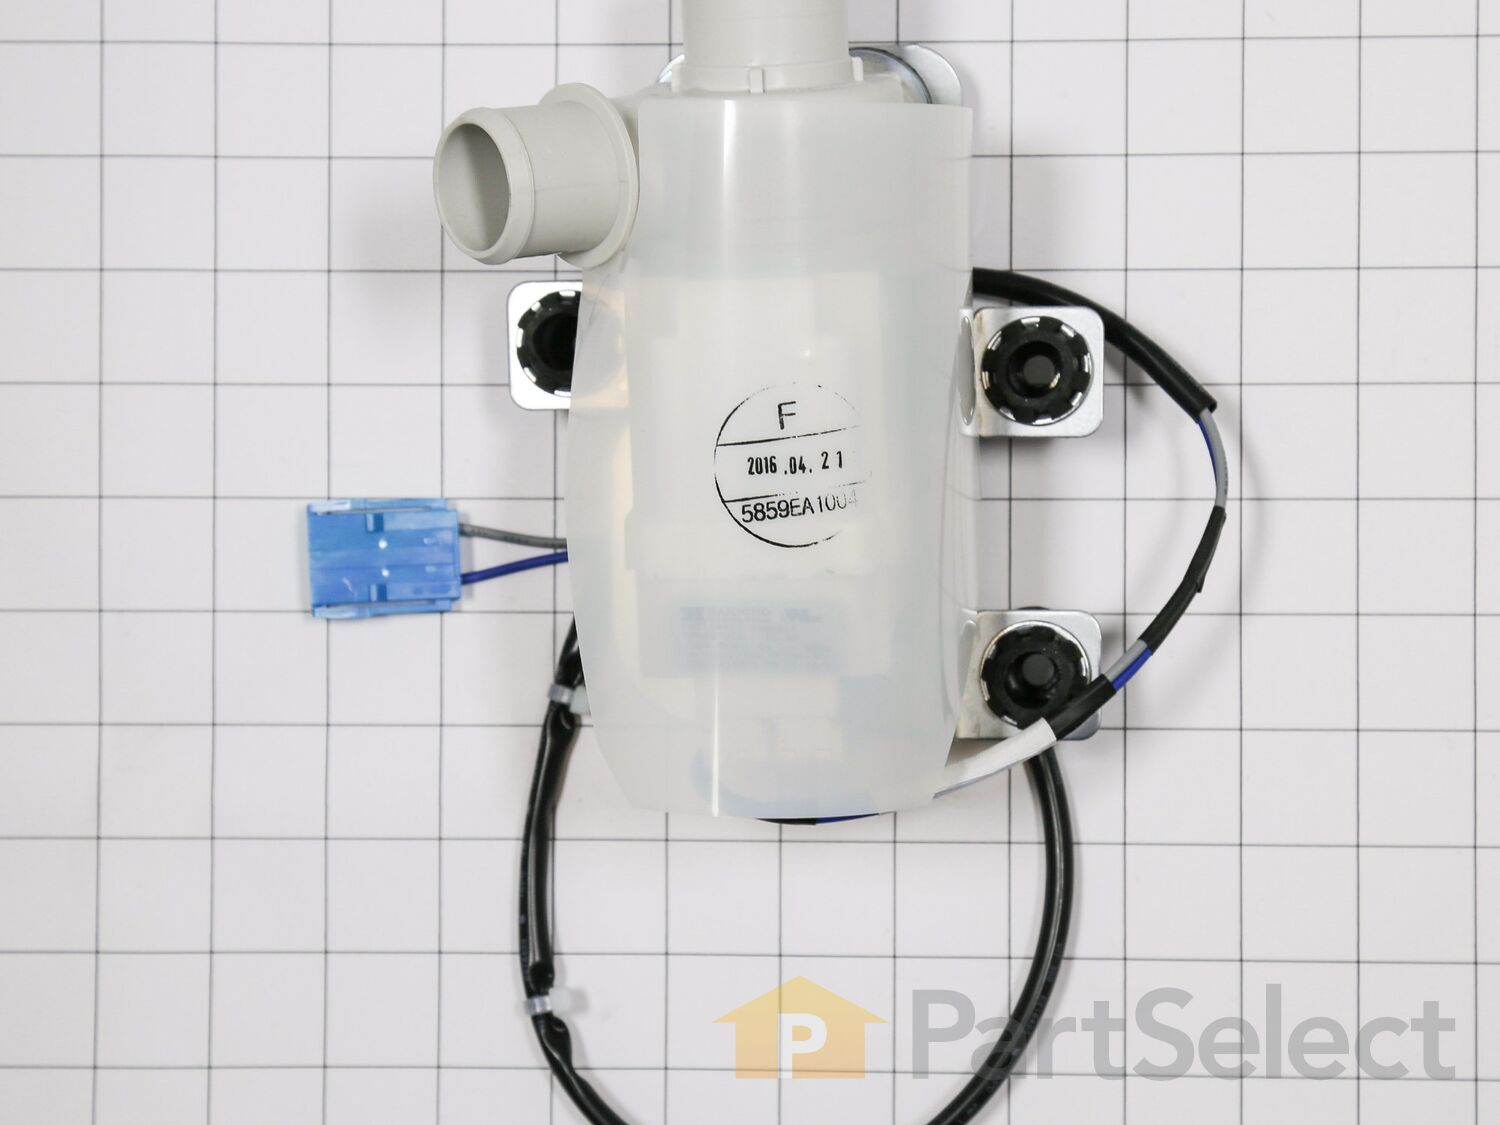 Replacement Drain Pump For LG Washer 5859EA1004F AP5672257 PS7785505 